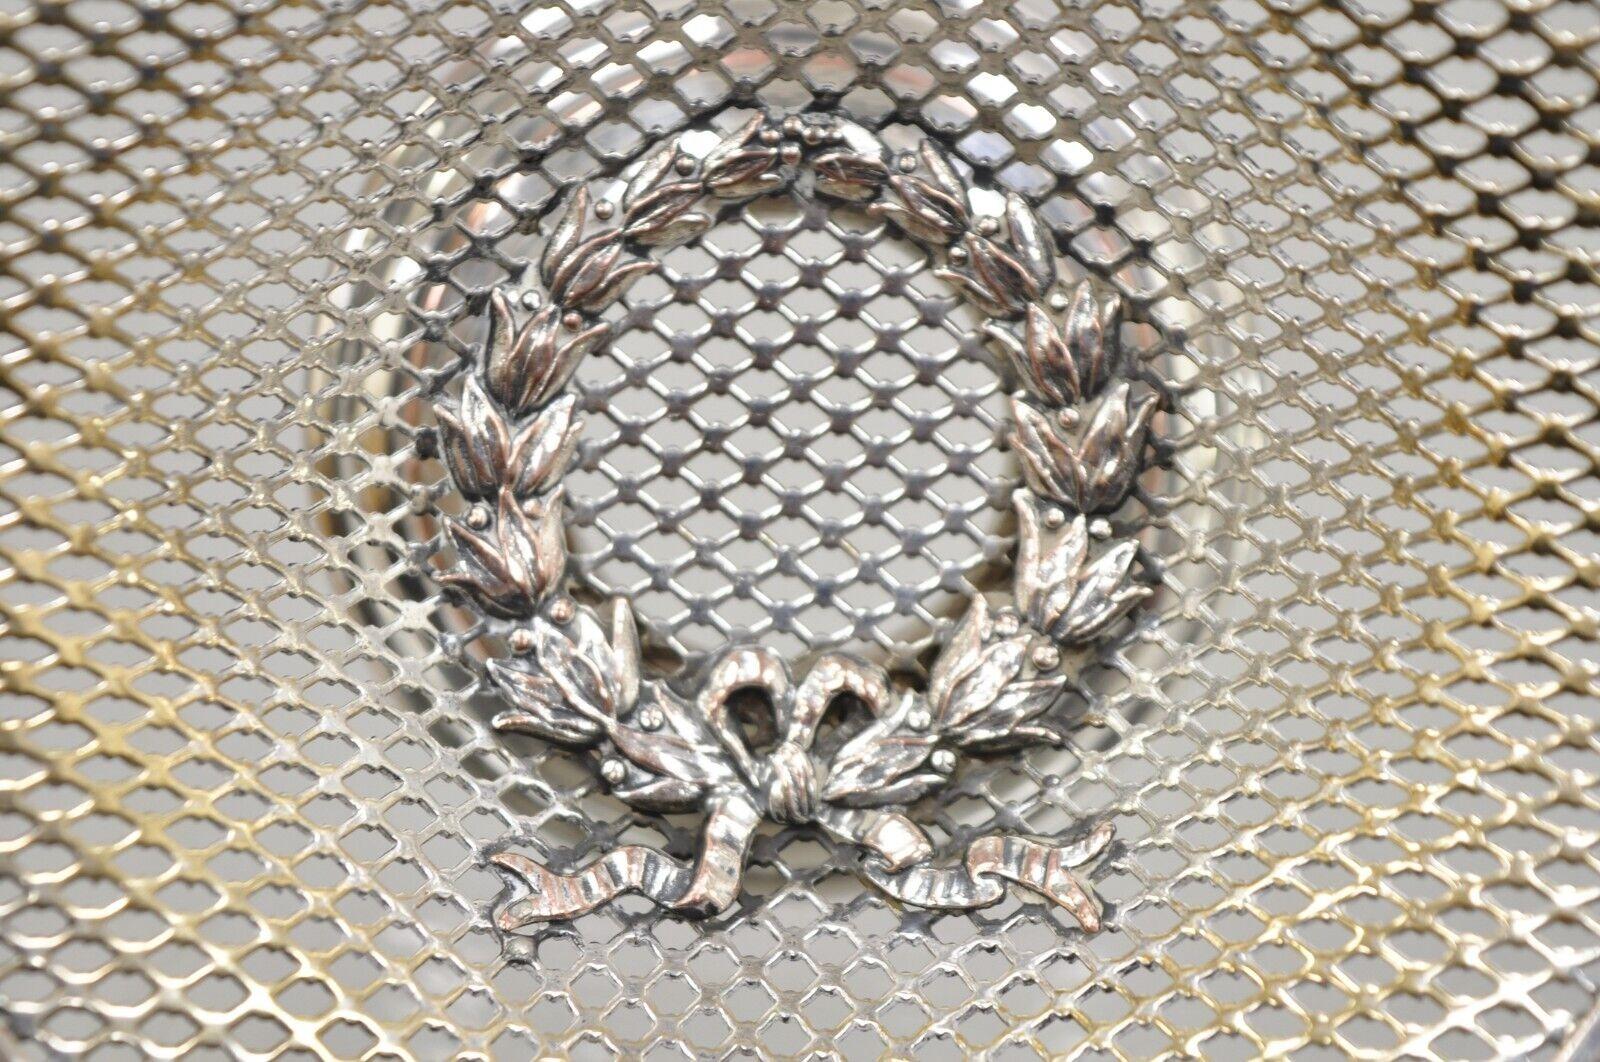 20th Century English Edwardian Silver Plated Wreath Design Small Mesh Basket Candy Dish -Pair For Sale